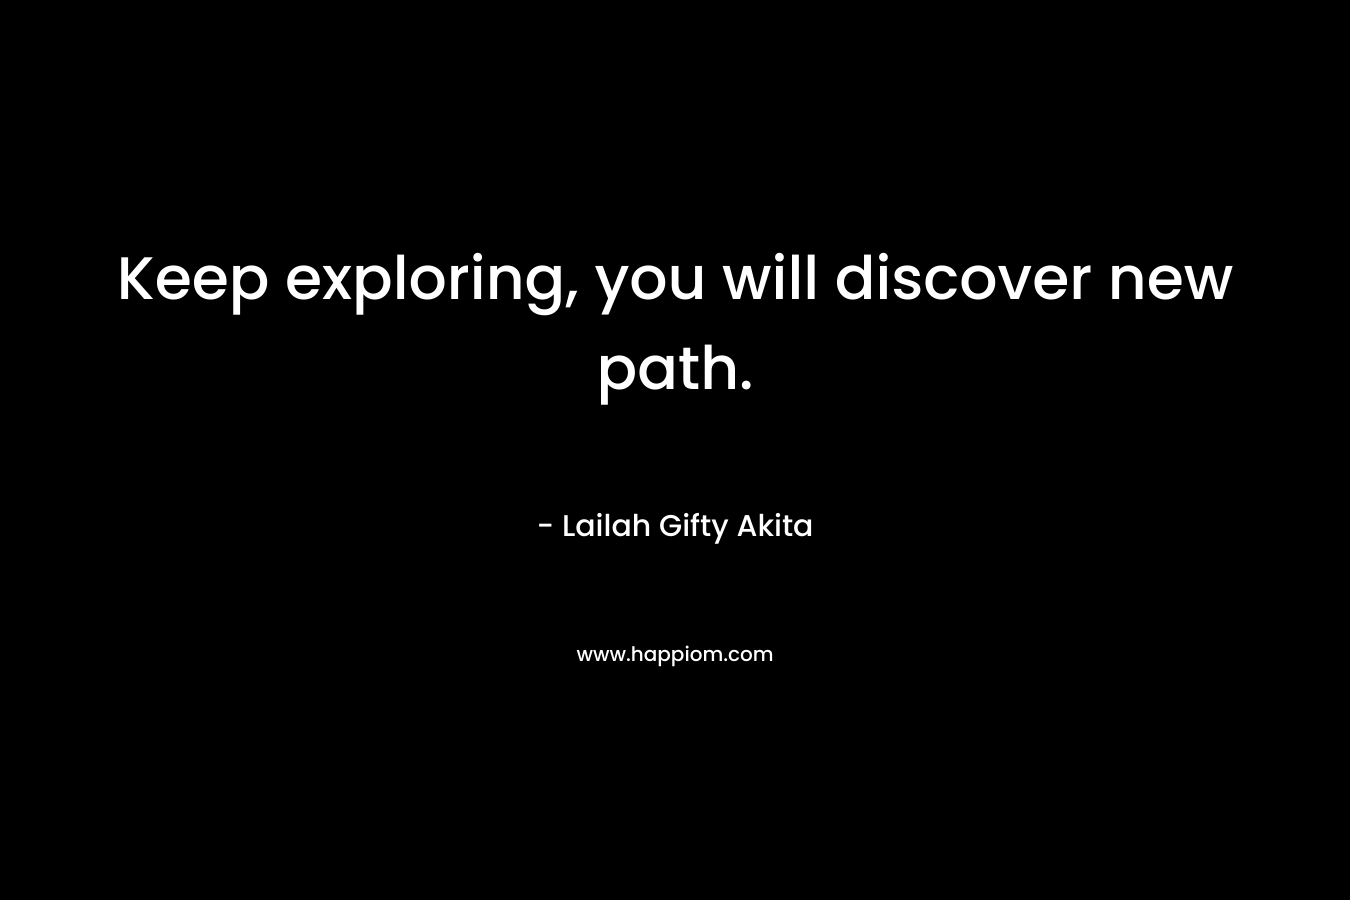 Keep exploring, you will discover new path.